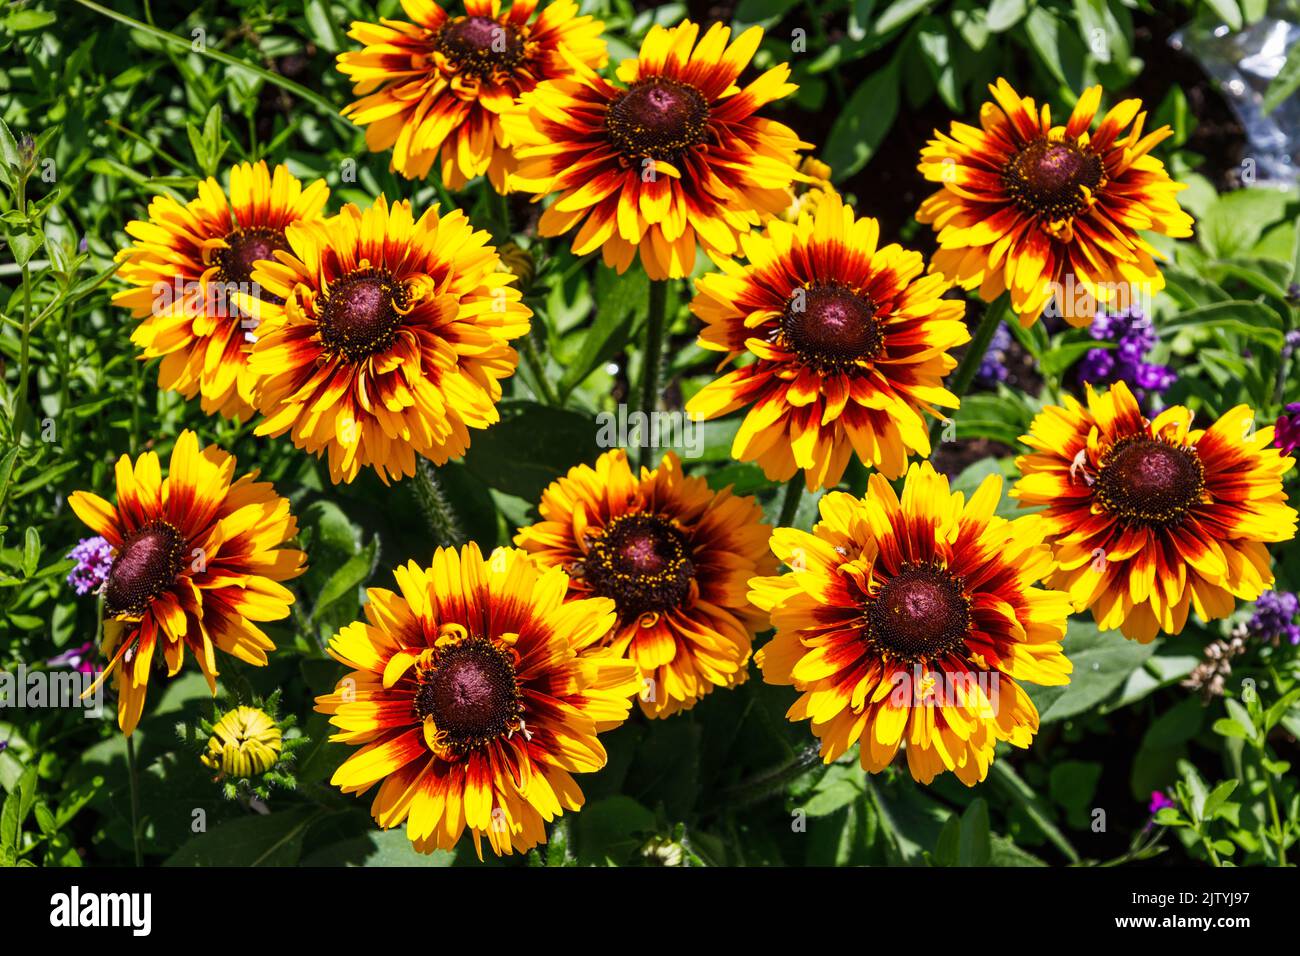 Rudbeckia Hirta, commonly called black eyed Susan bloom in the summer garden Stock Photo